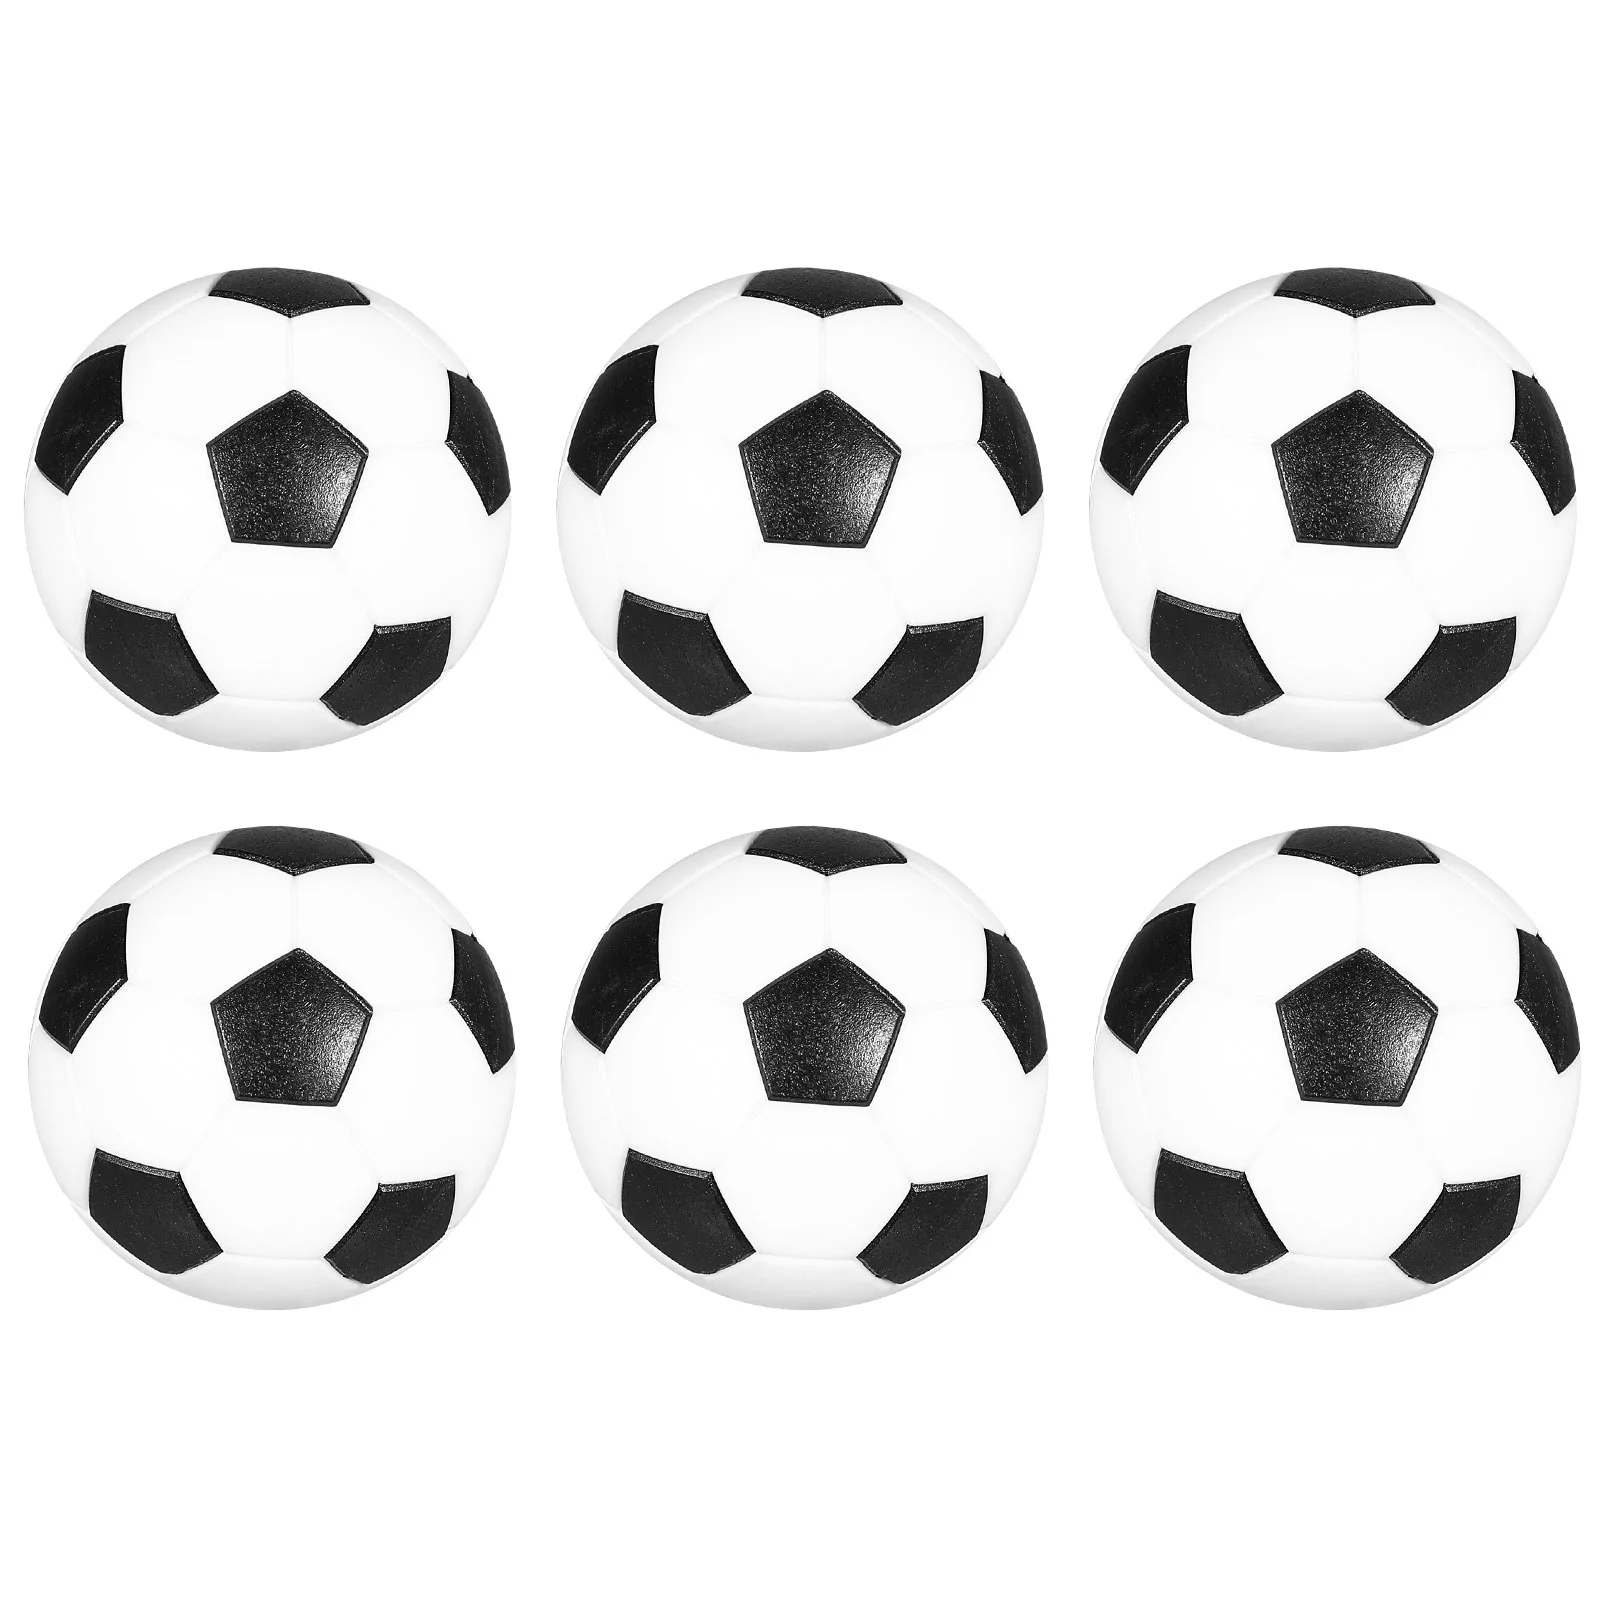 32mm Table Soccer Footballs Replacements Mini Black and White Soccer Balls black and white football Table Soccer playiing